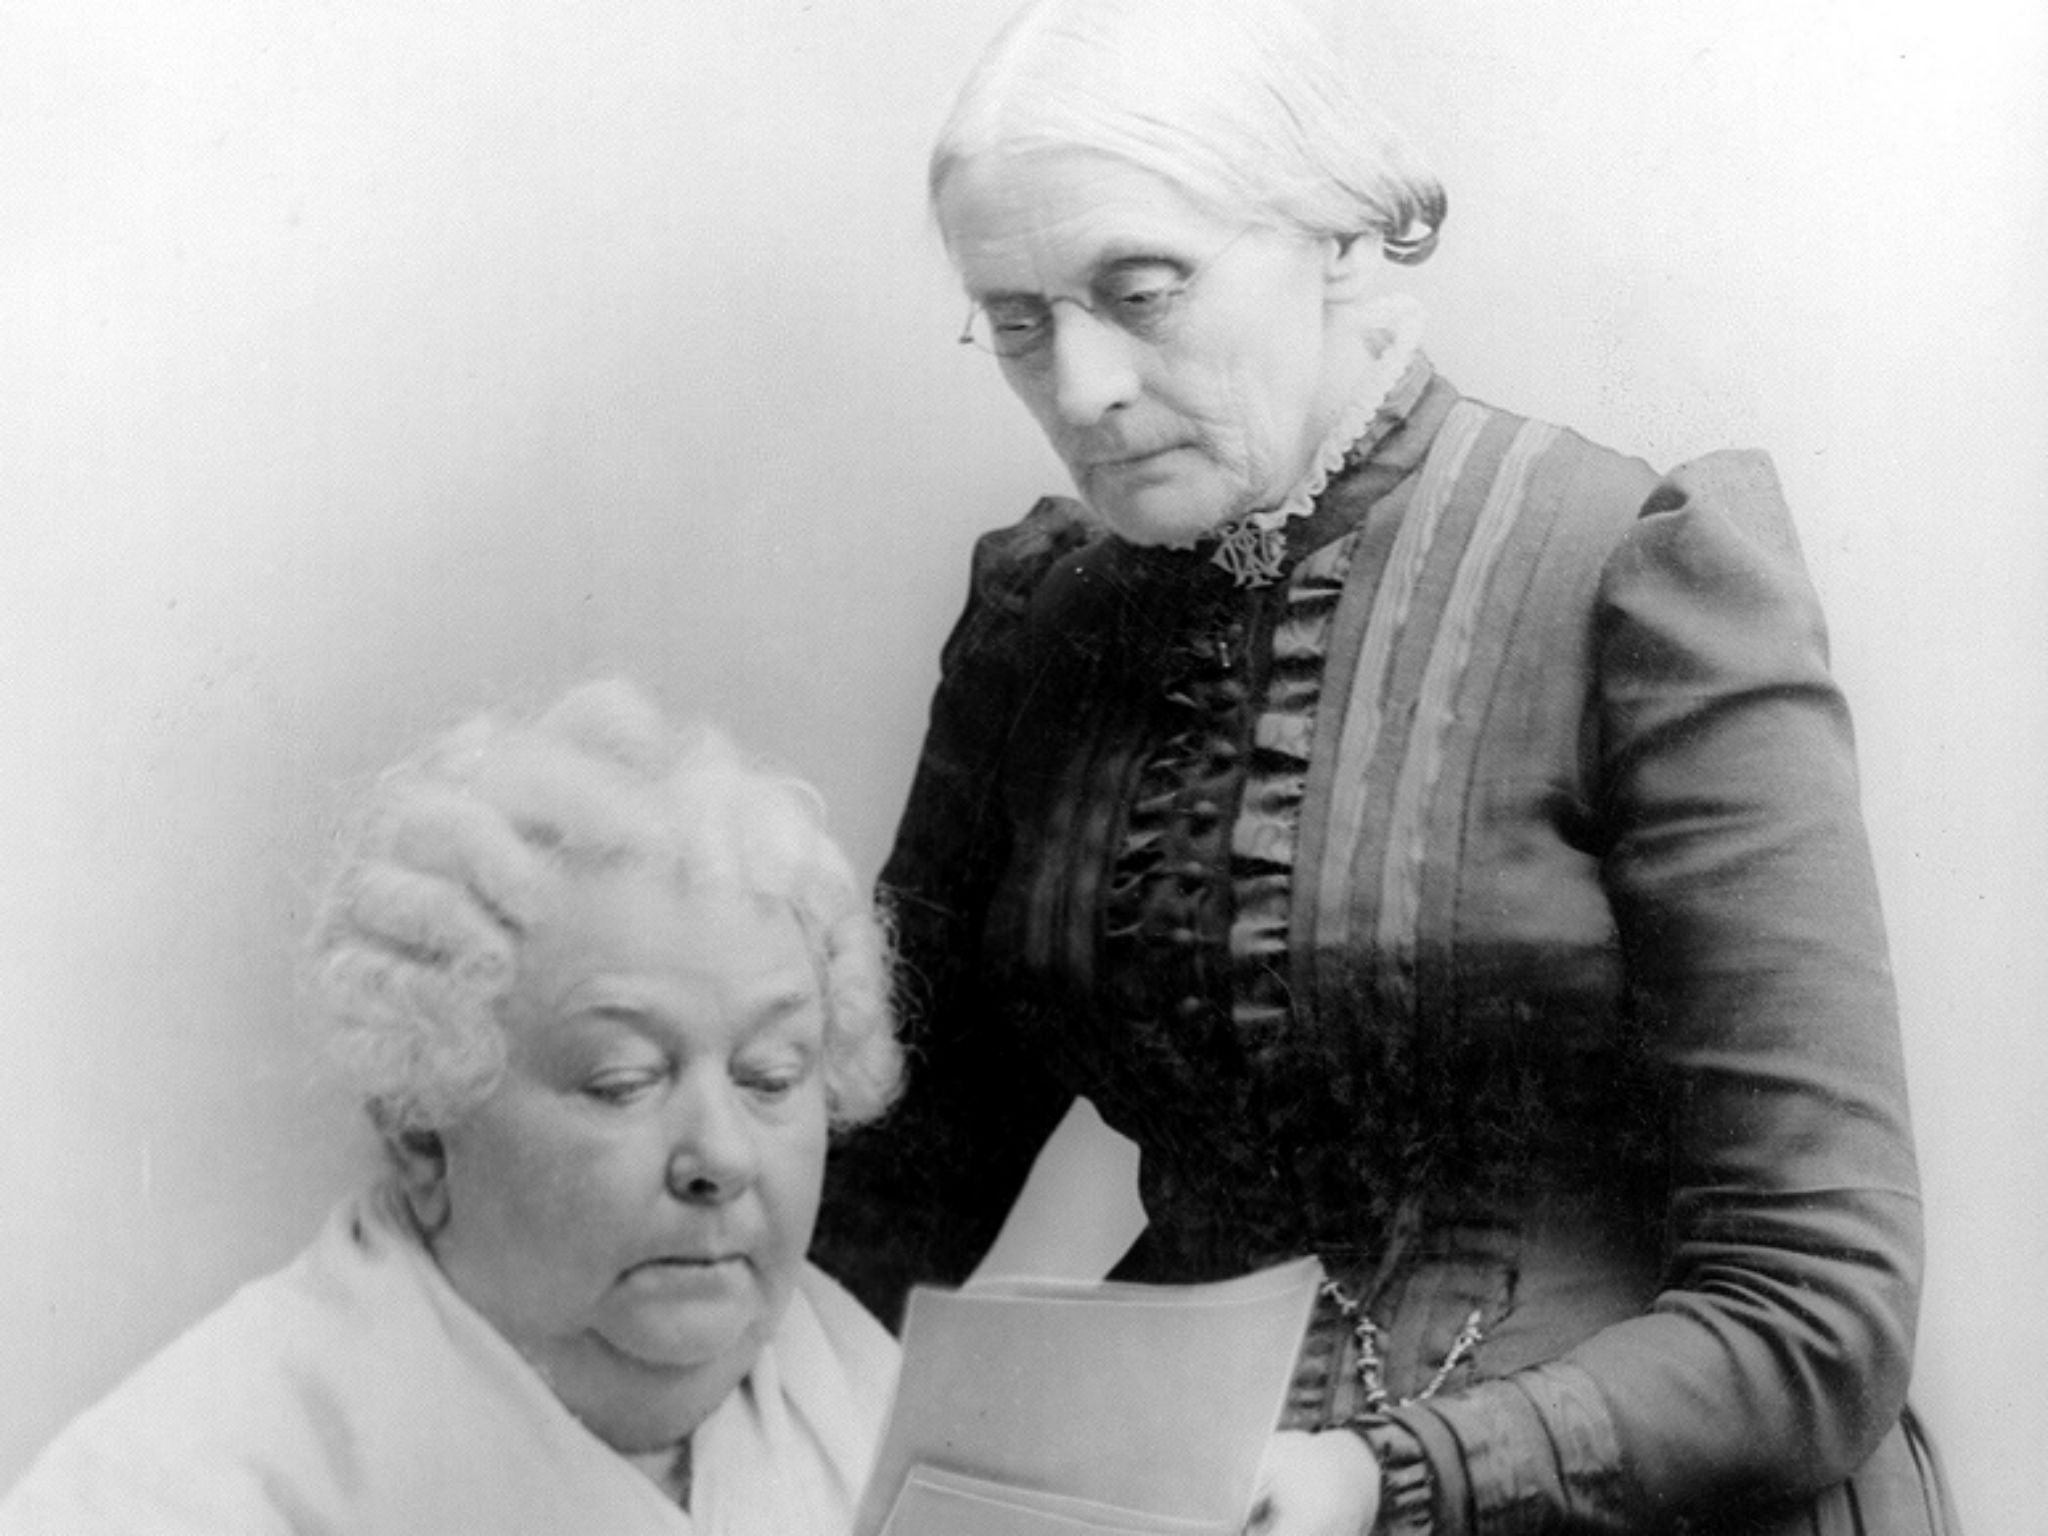 Stanton and Anthony established the National Woman Suffrage Association